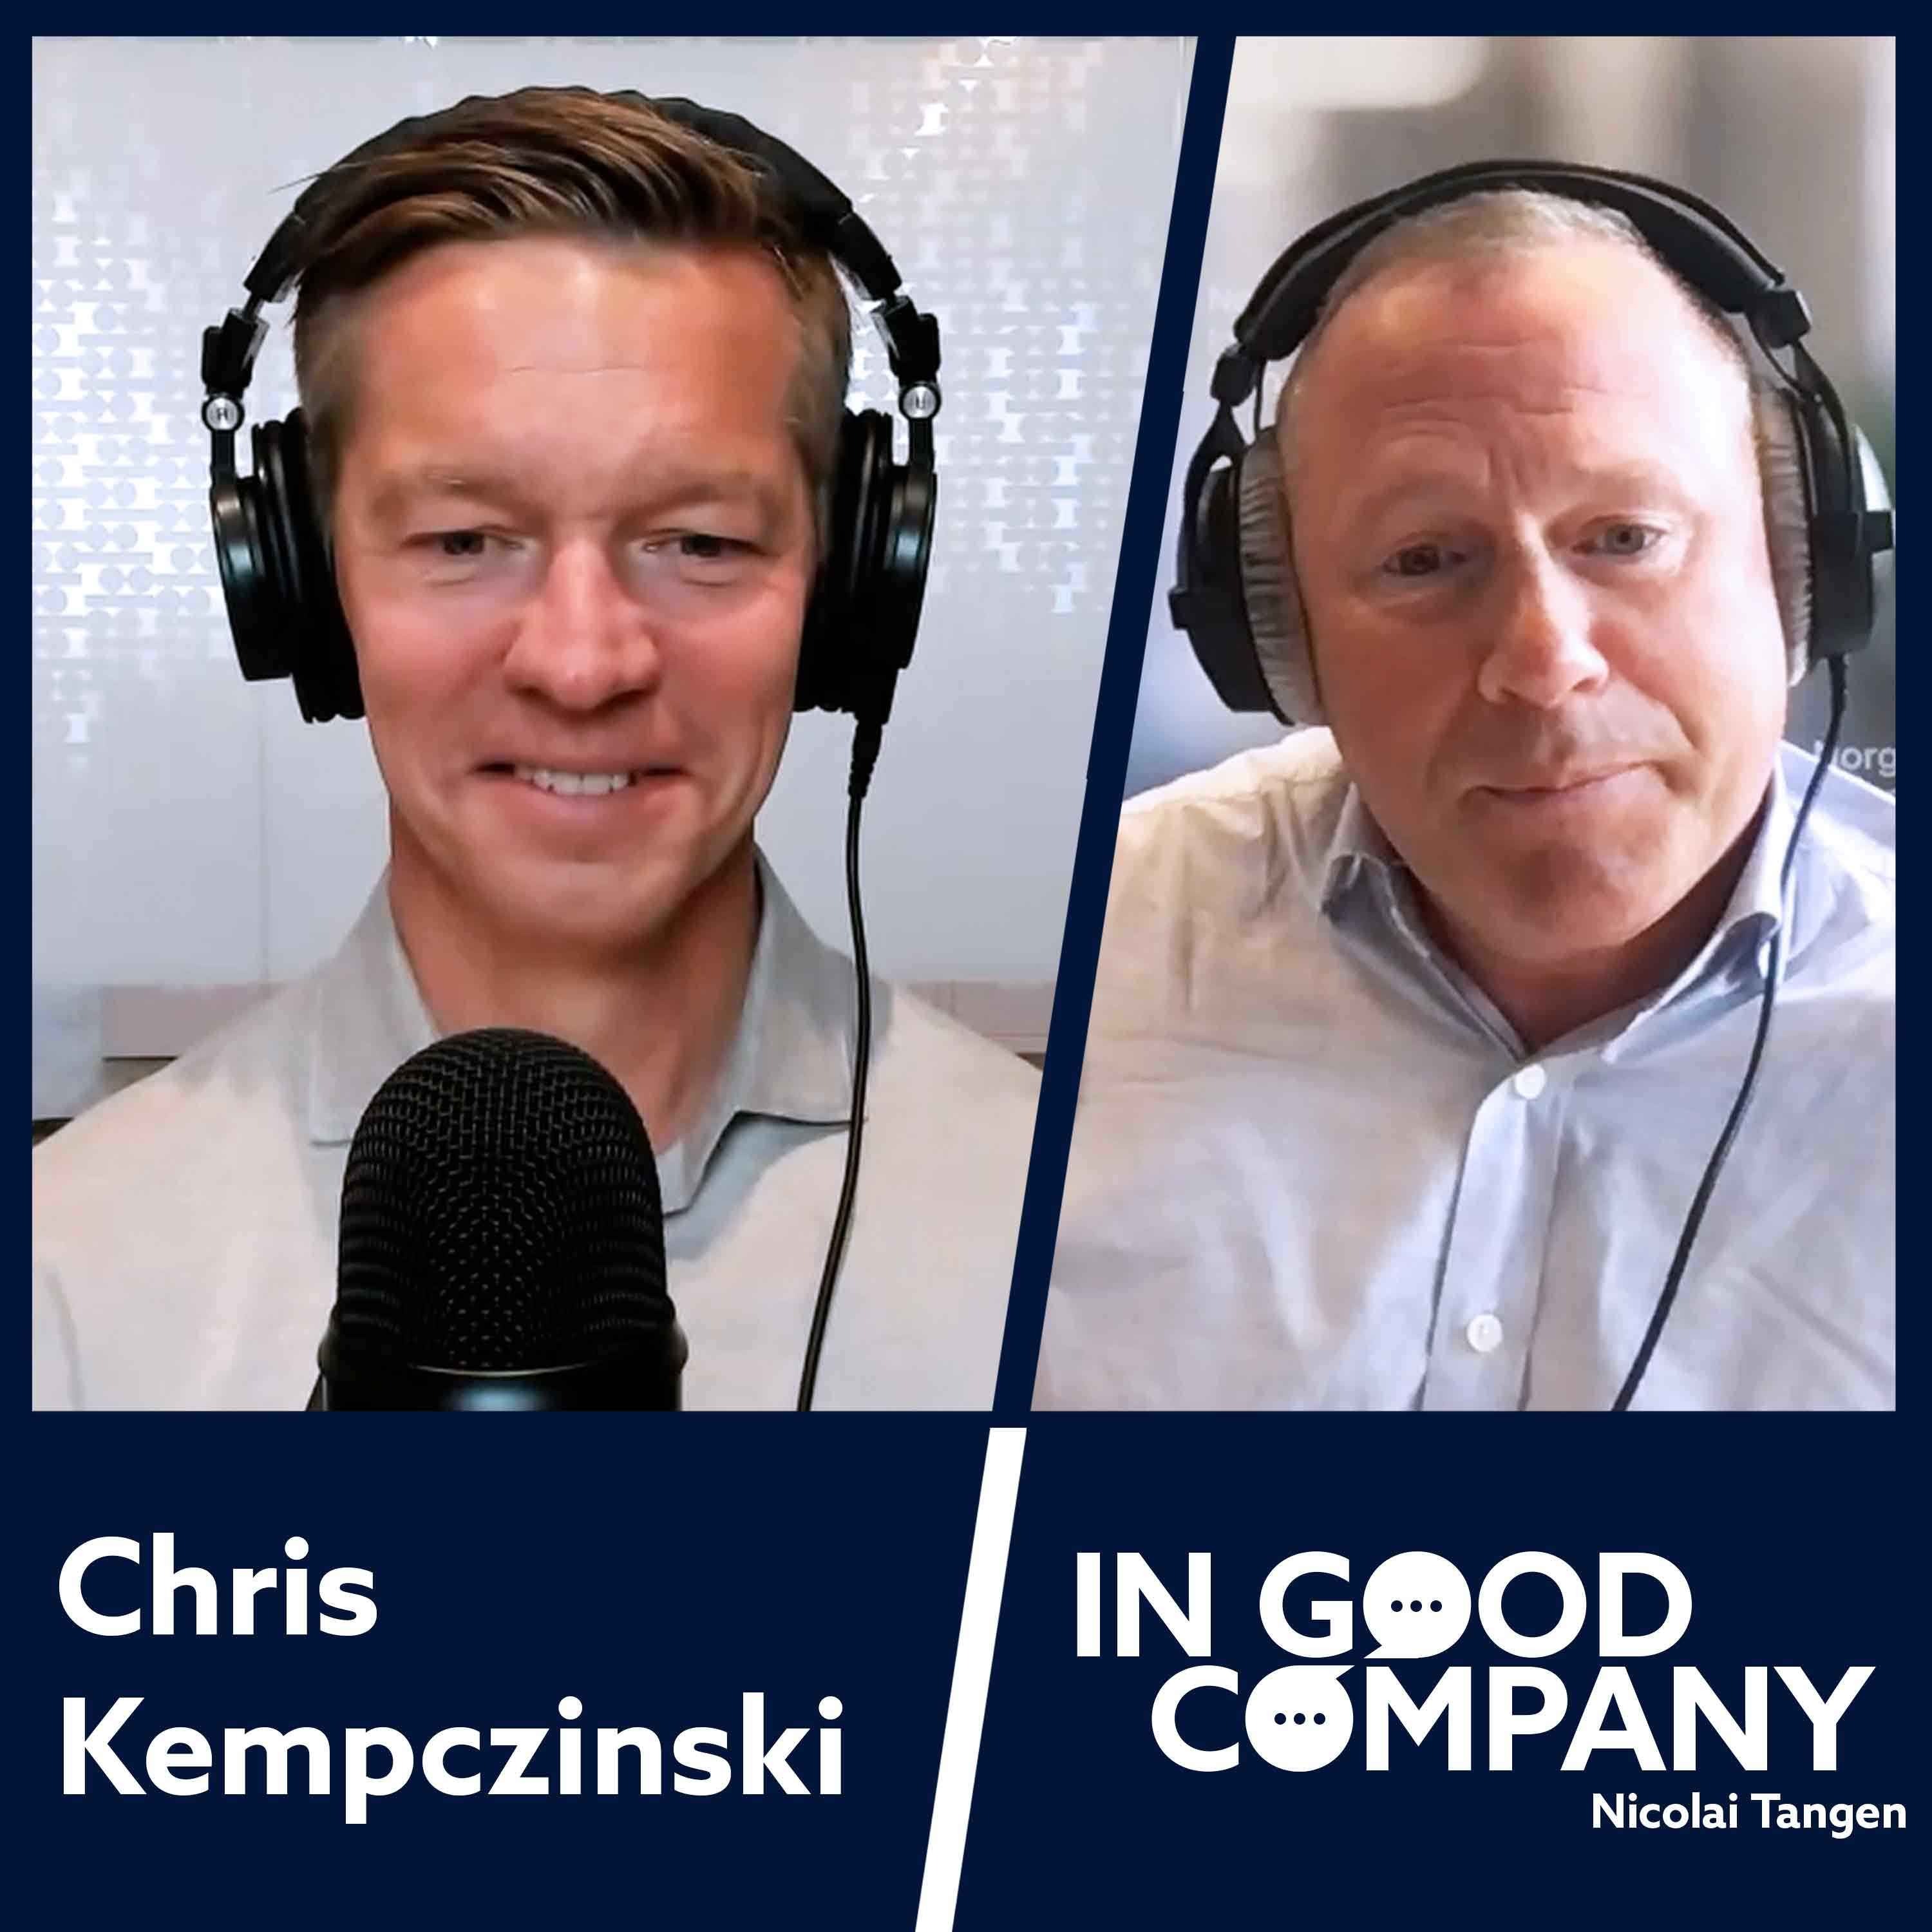 Chris Kempczinski CEO of McDonald's by Norges Bank Investment Management